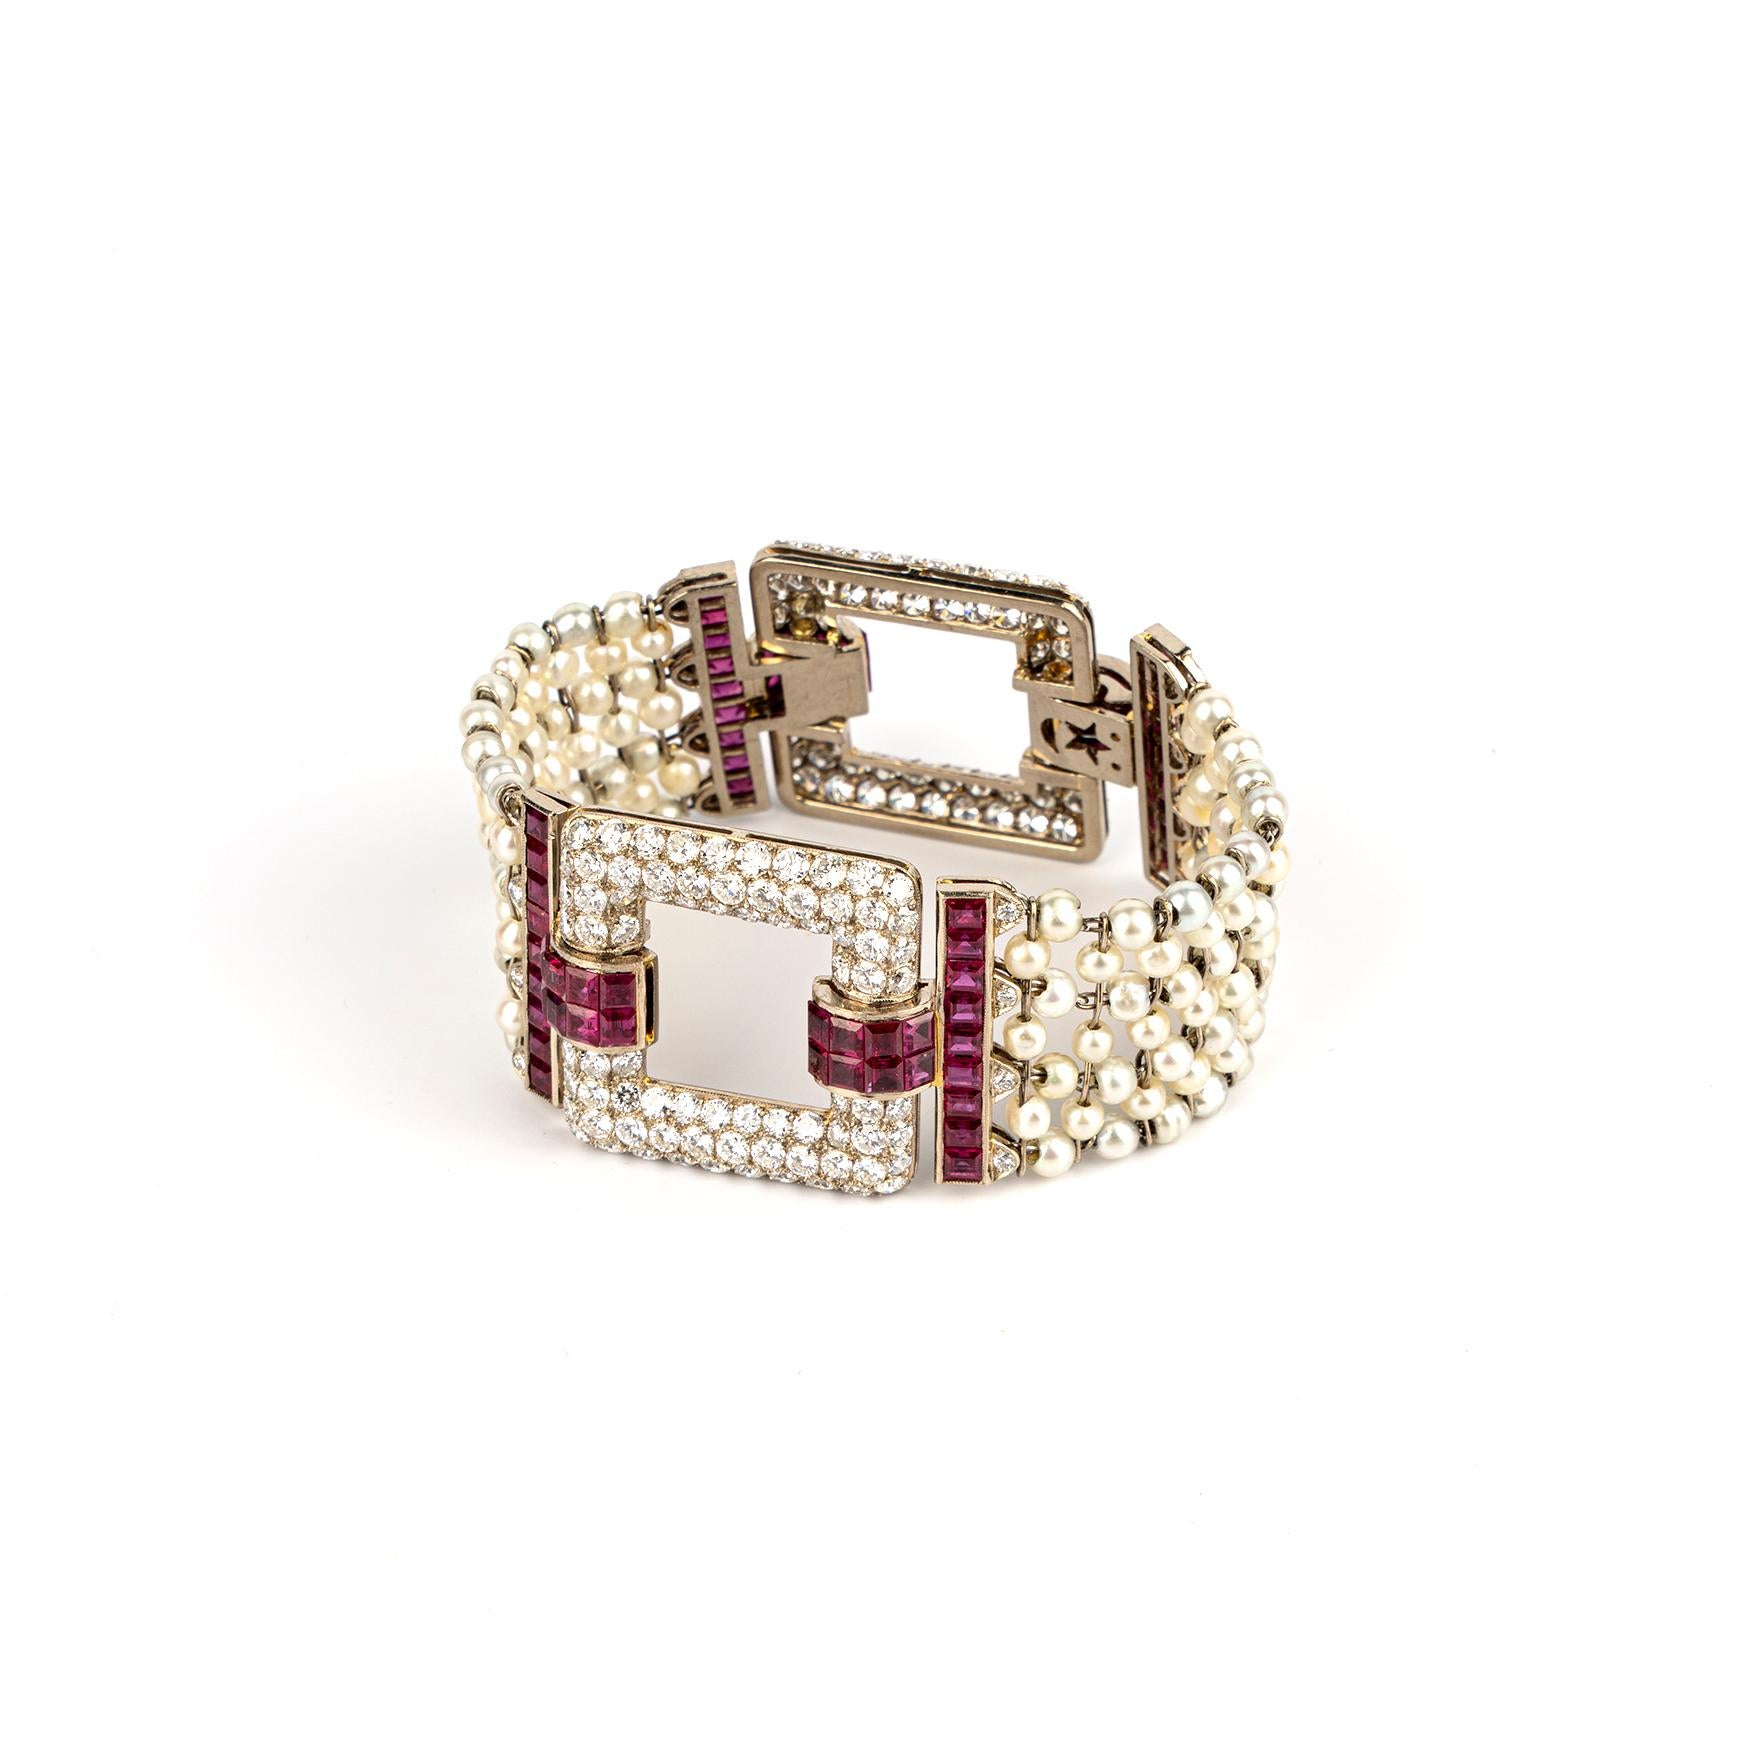 A sumptuous Art Deco Bracelet showcasing seven rows of natural pearls linked to two beautiful Ruby and Diamond Clasps. The bracelet is accompanied by its original box from George H. Newstedt of Cincinnati. Made in America, circa 1920.